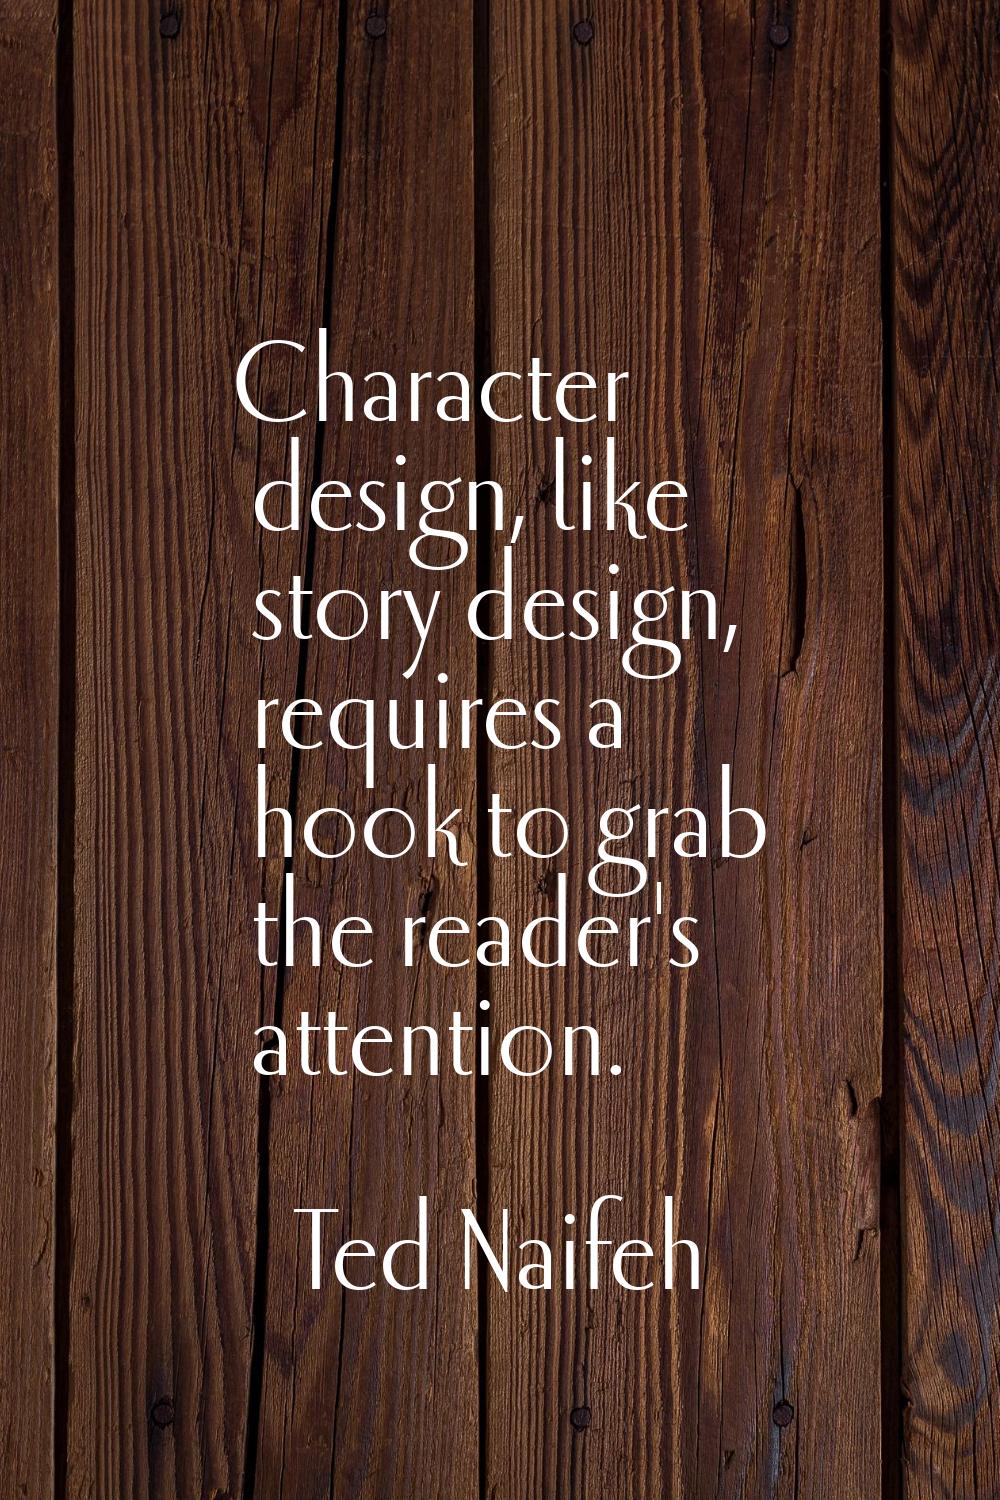 Character design, like story design, requires a hook to grab the reader's attention.